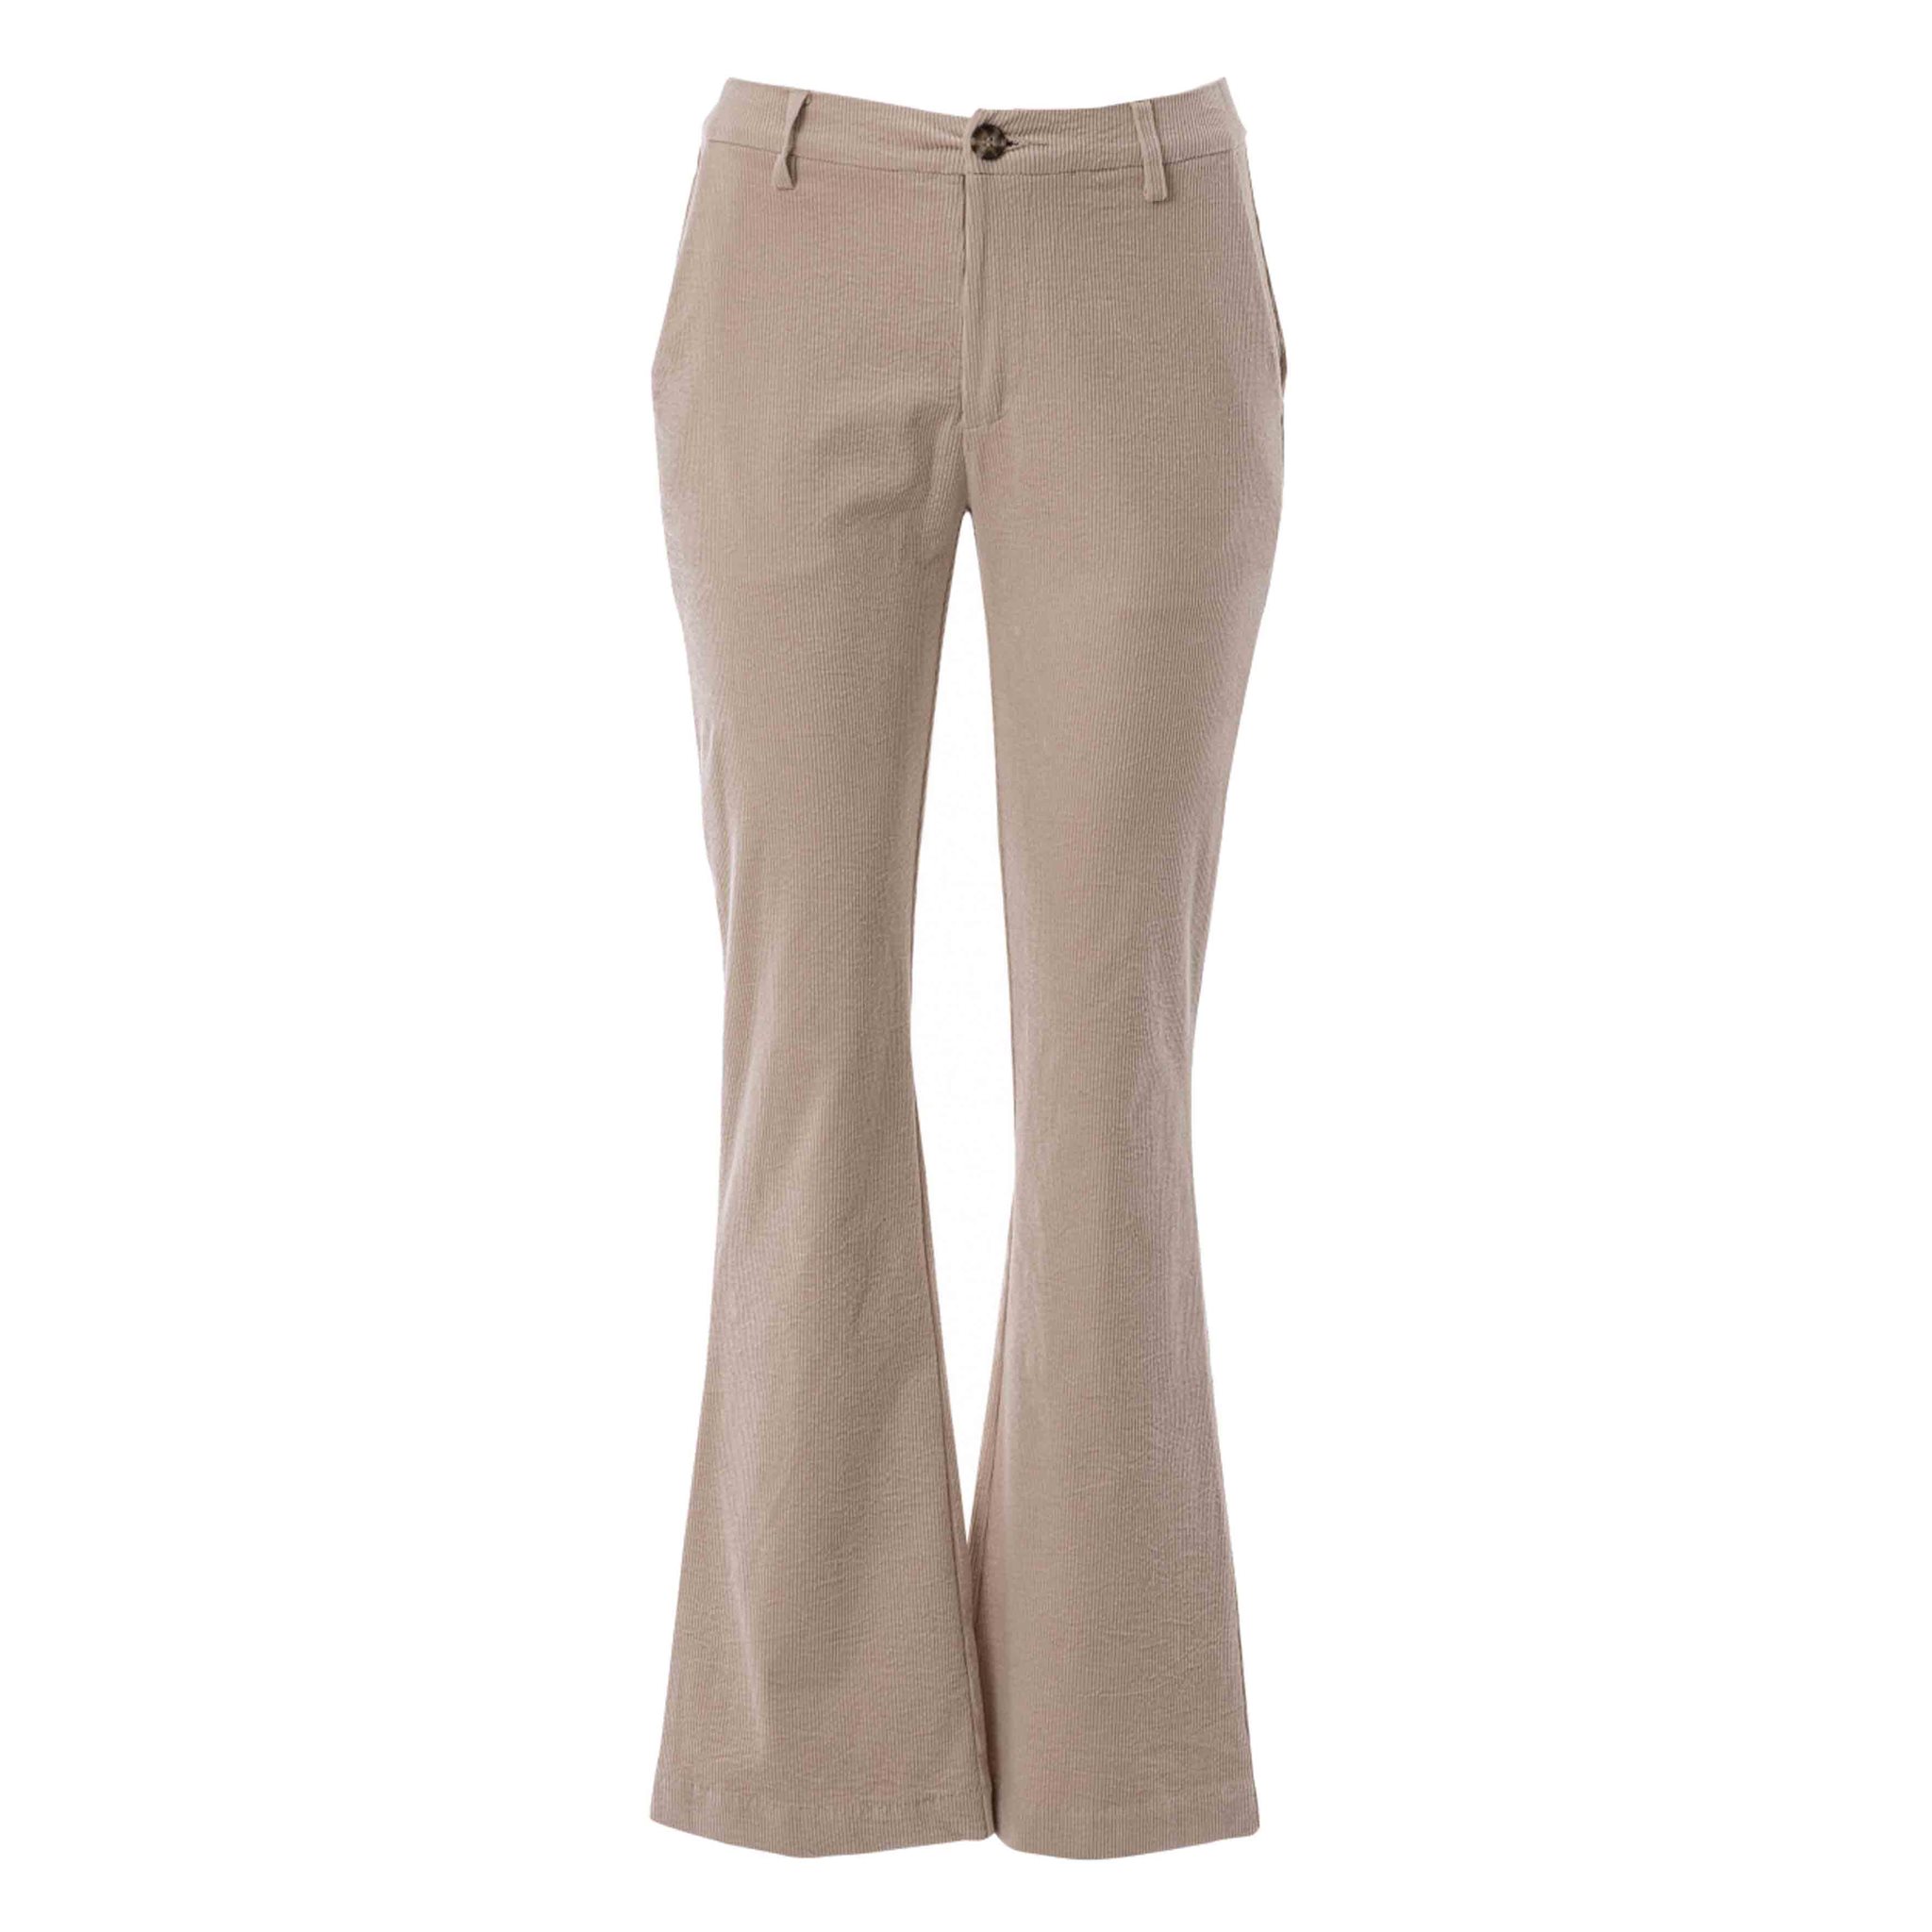 Penny trousers Jc SOPHIE